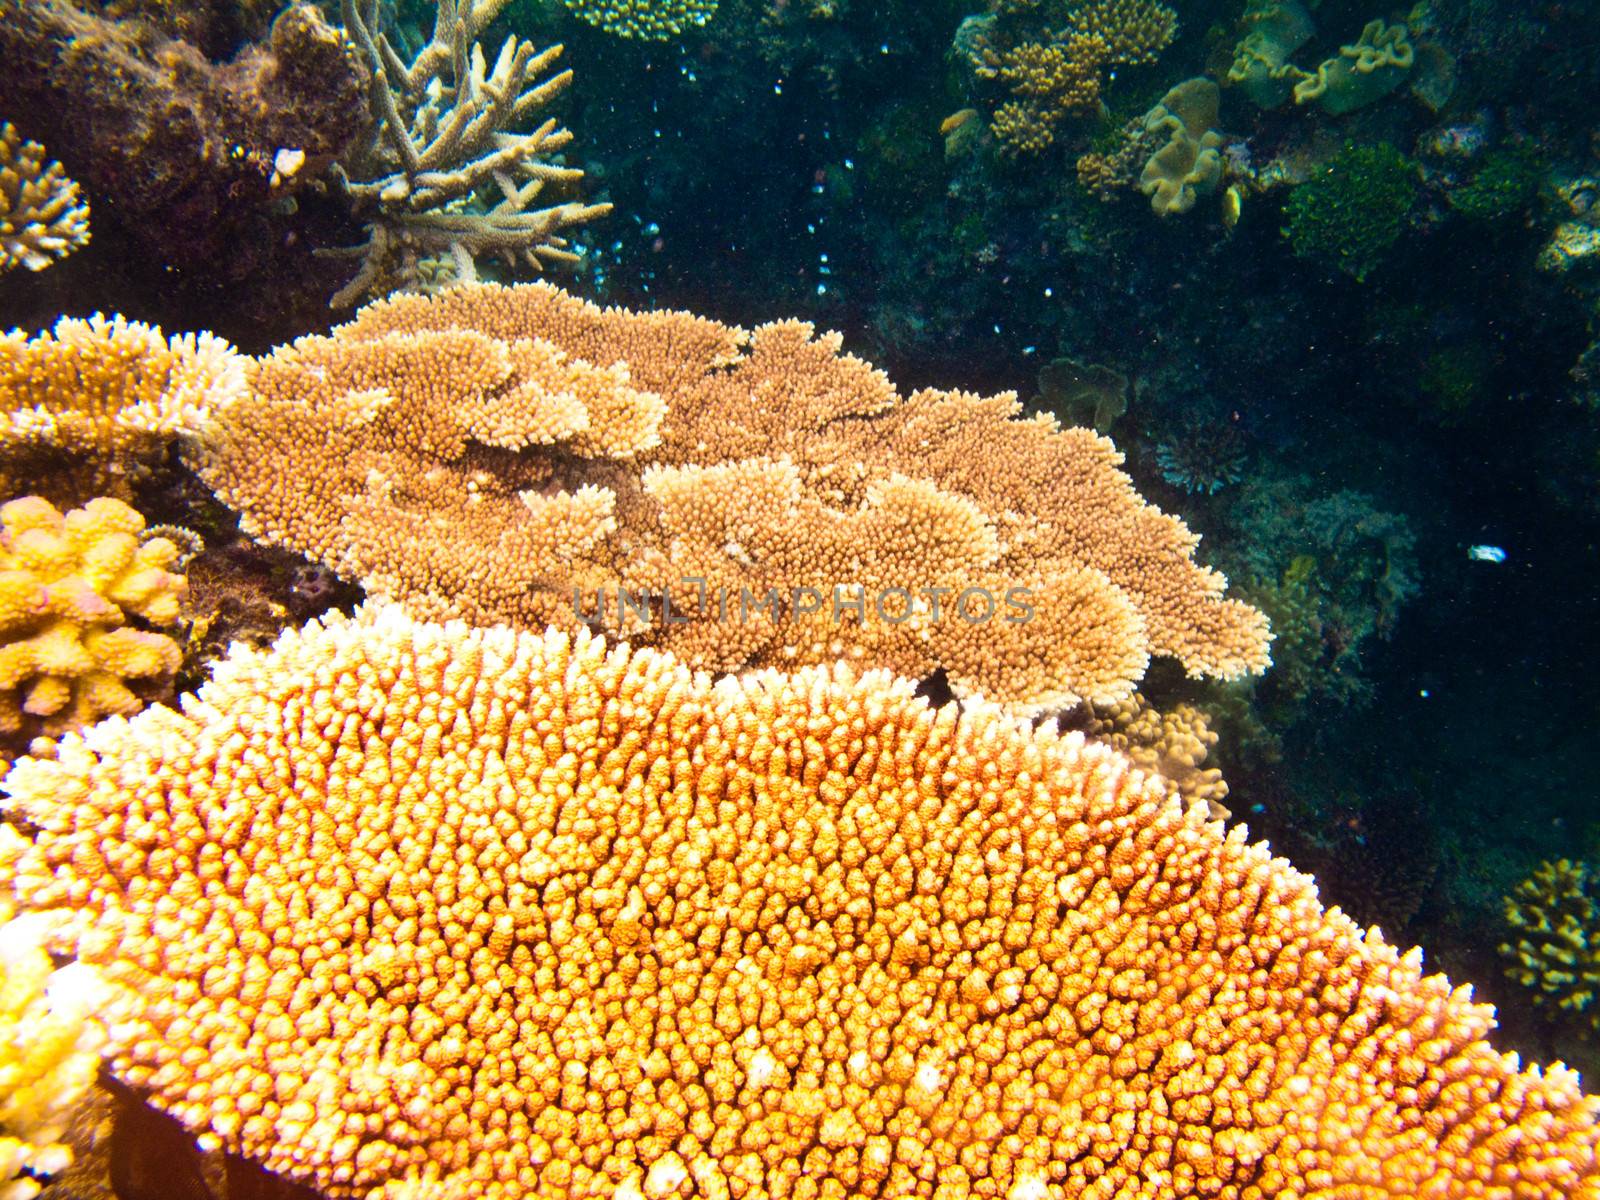 View underwater shot of plant life of the coral reef.